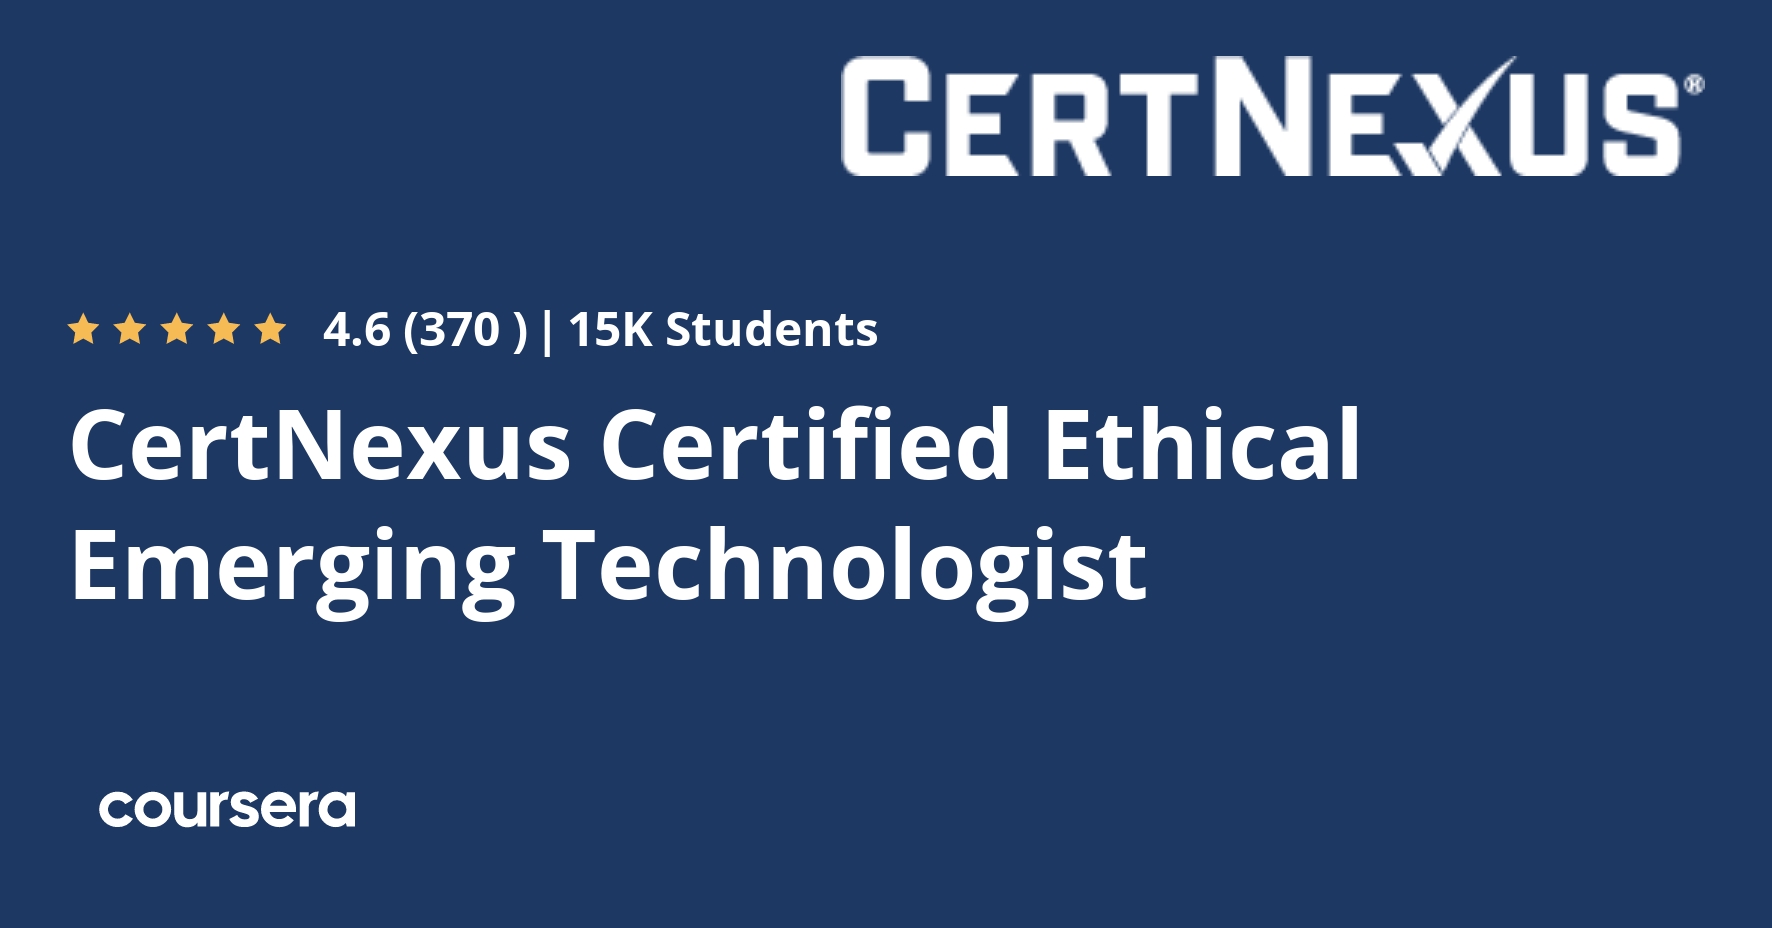 certnexus-certified-ethical-emerging-technologist